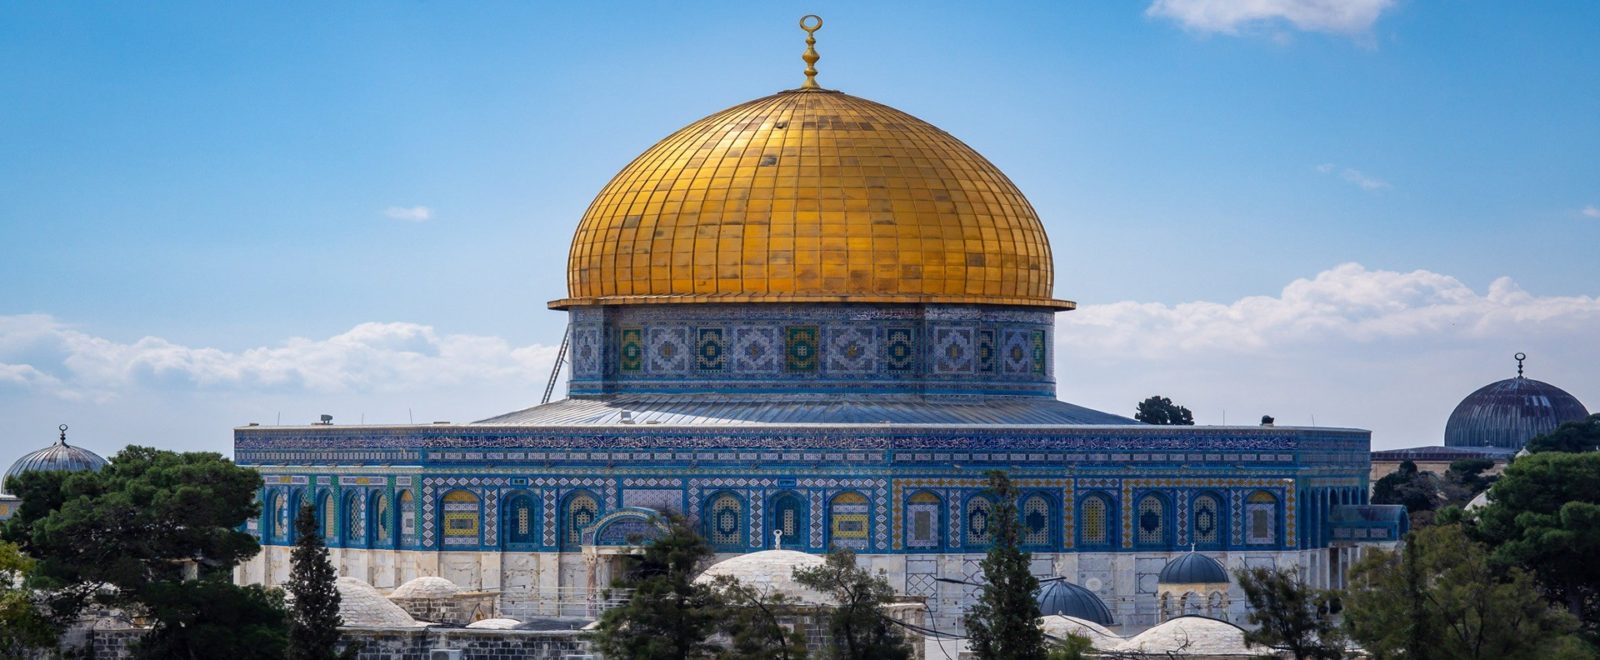 Dome of the Rock on the Temple Mount in Jerusalem